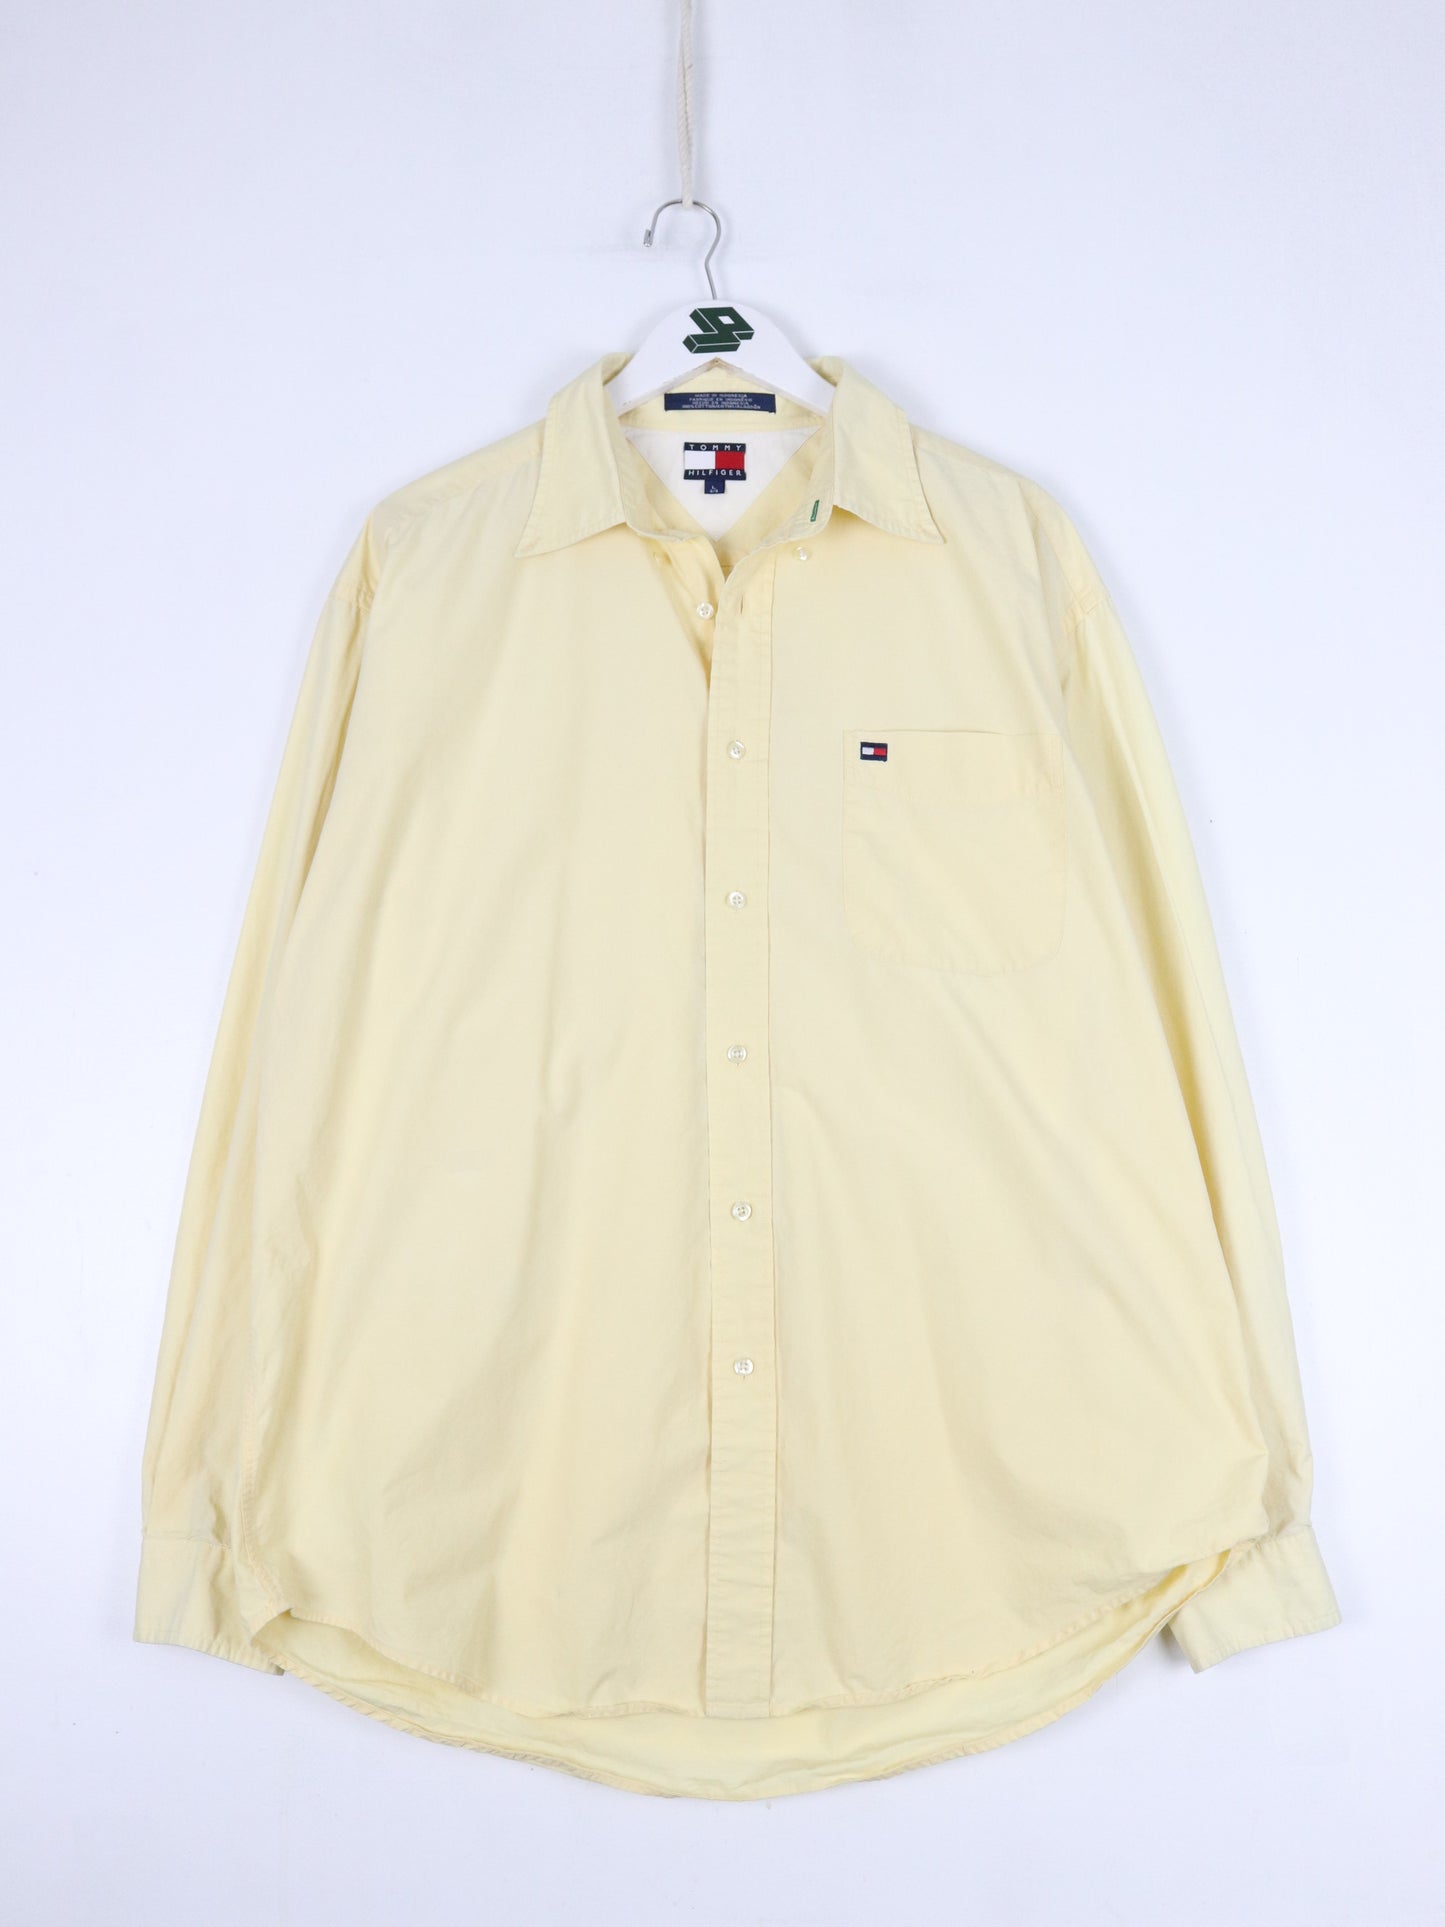 Vintage Tommy Hilfiger Shirt Mens Large Yellow Button Up